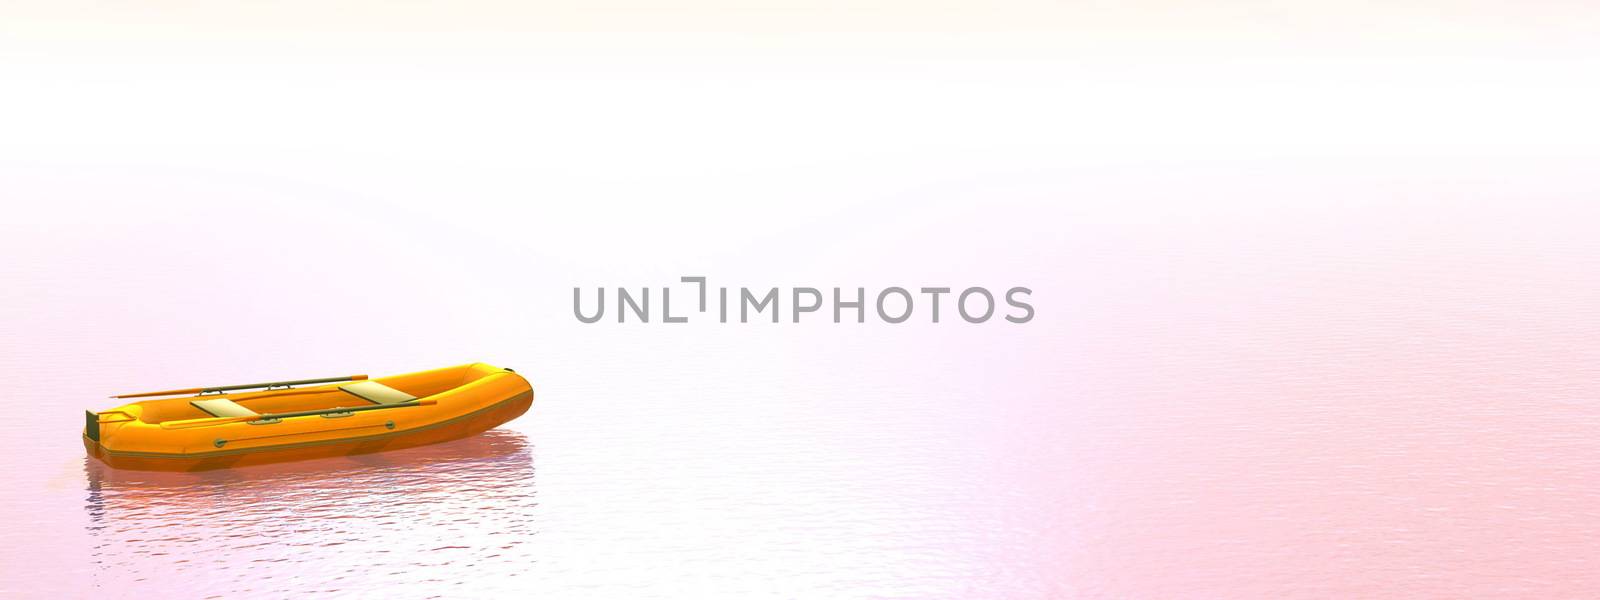 Inflatable boat - 3D render by Elenaphotos21